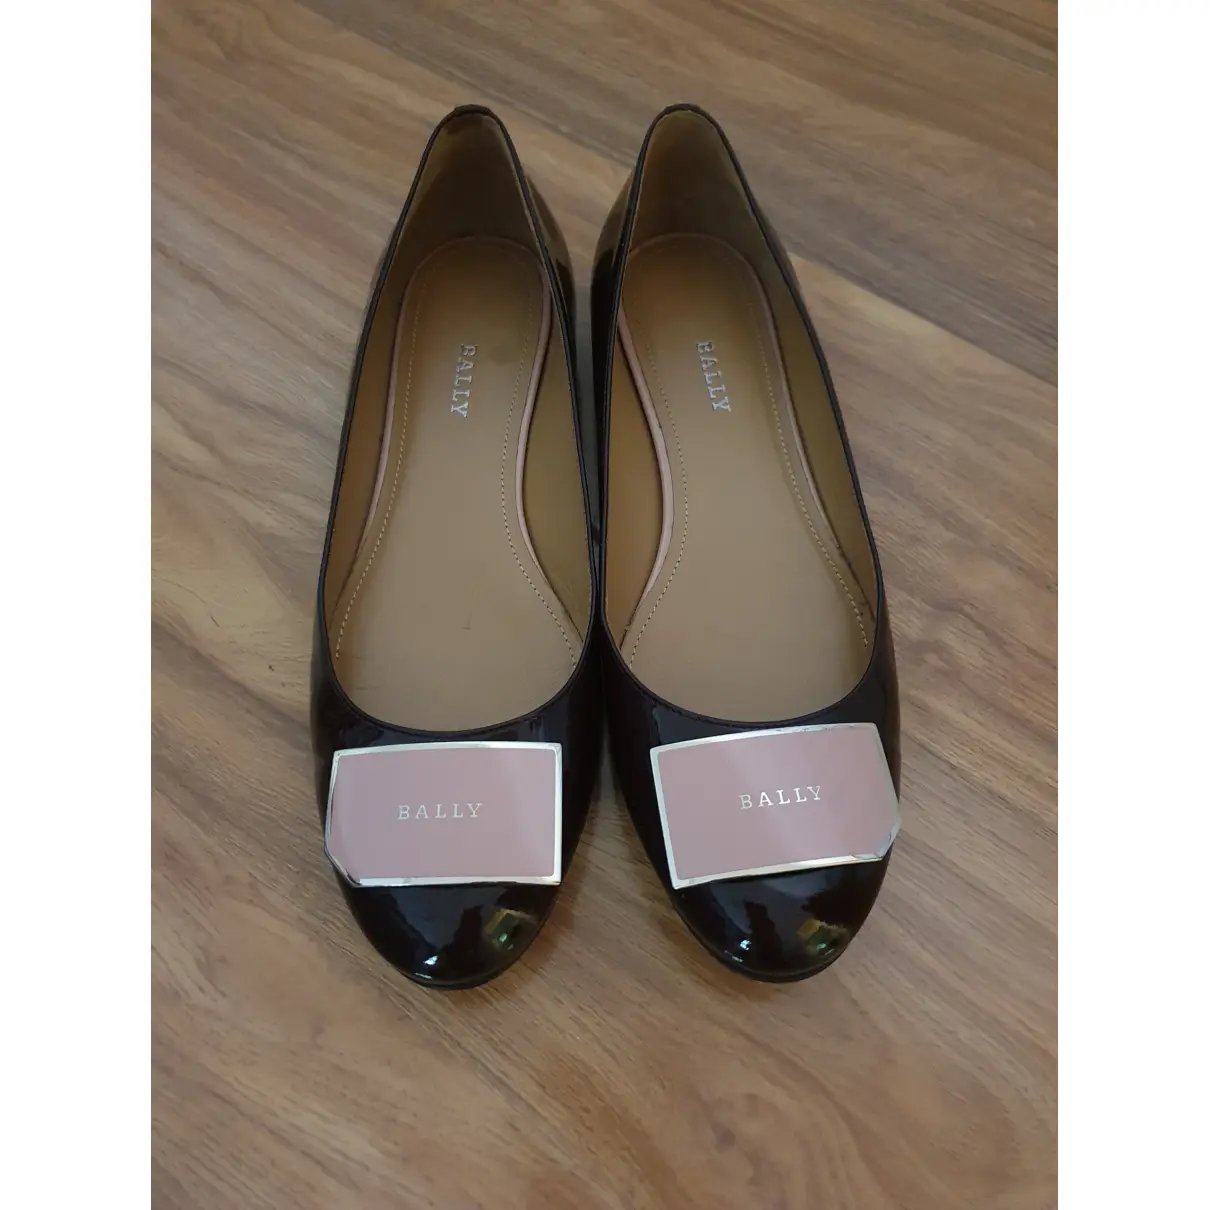 Buy Bally Patent leather ballet flats online